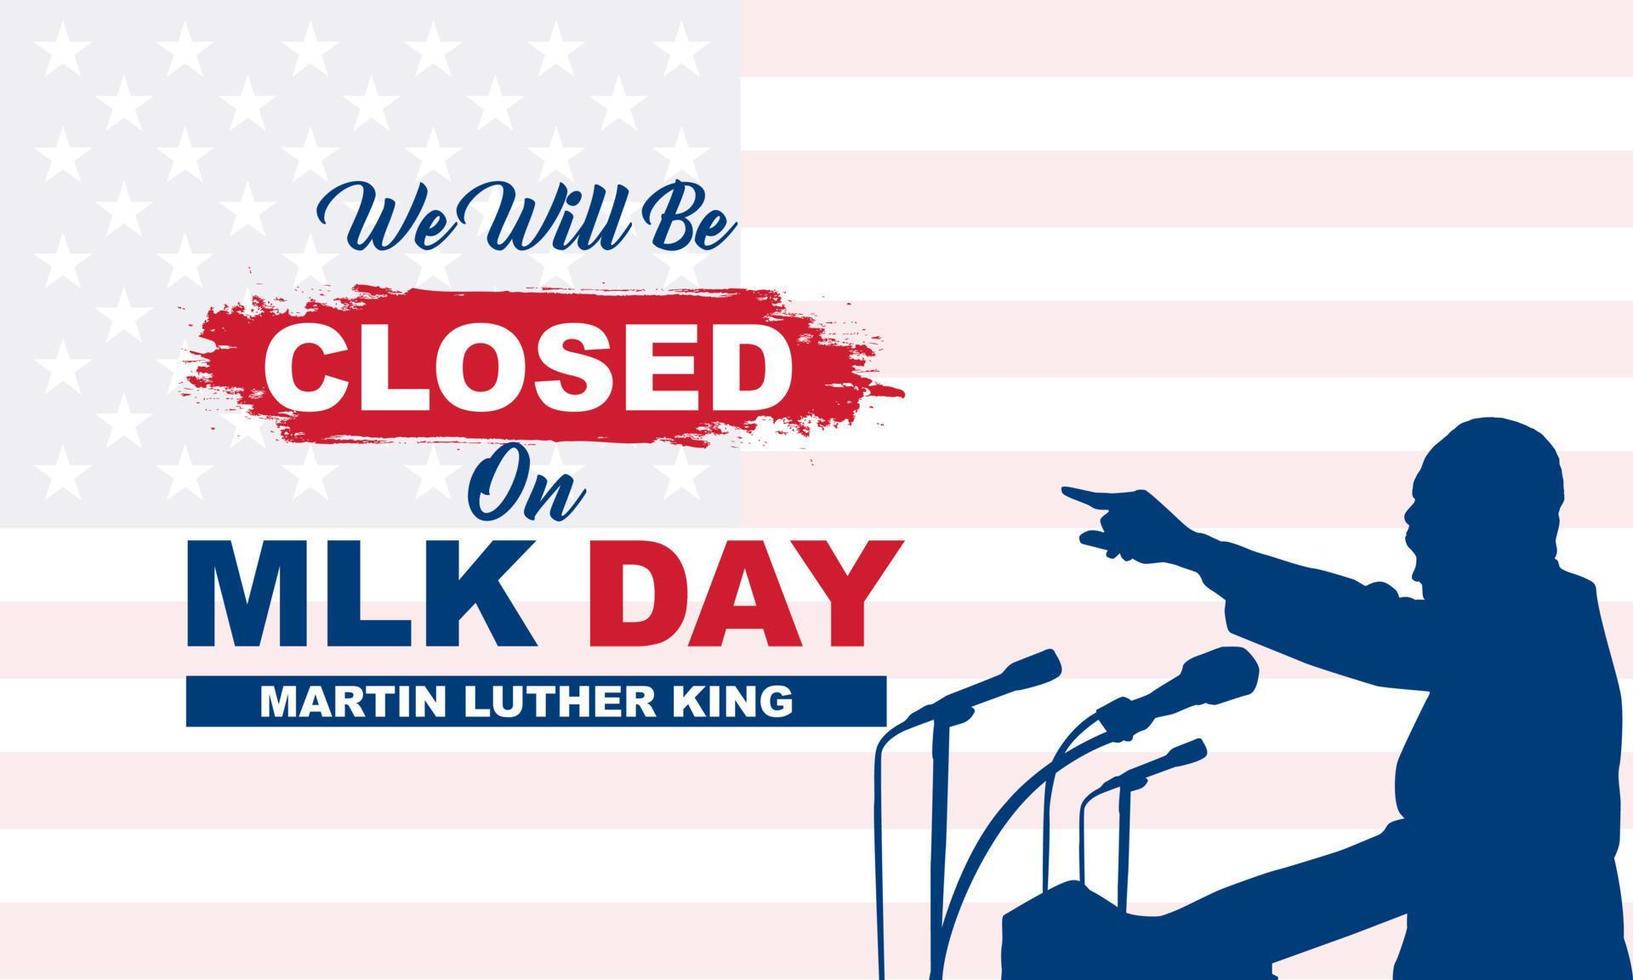 Martin Luther King Jr. Day Background. We will be Closed on MLK Day. Vector Illustration.